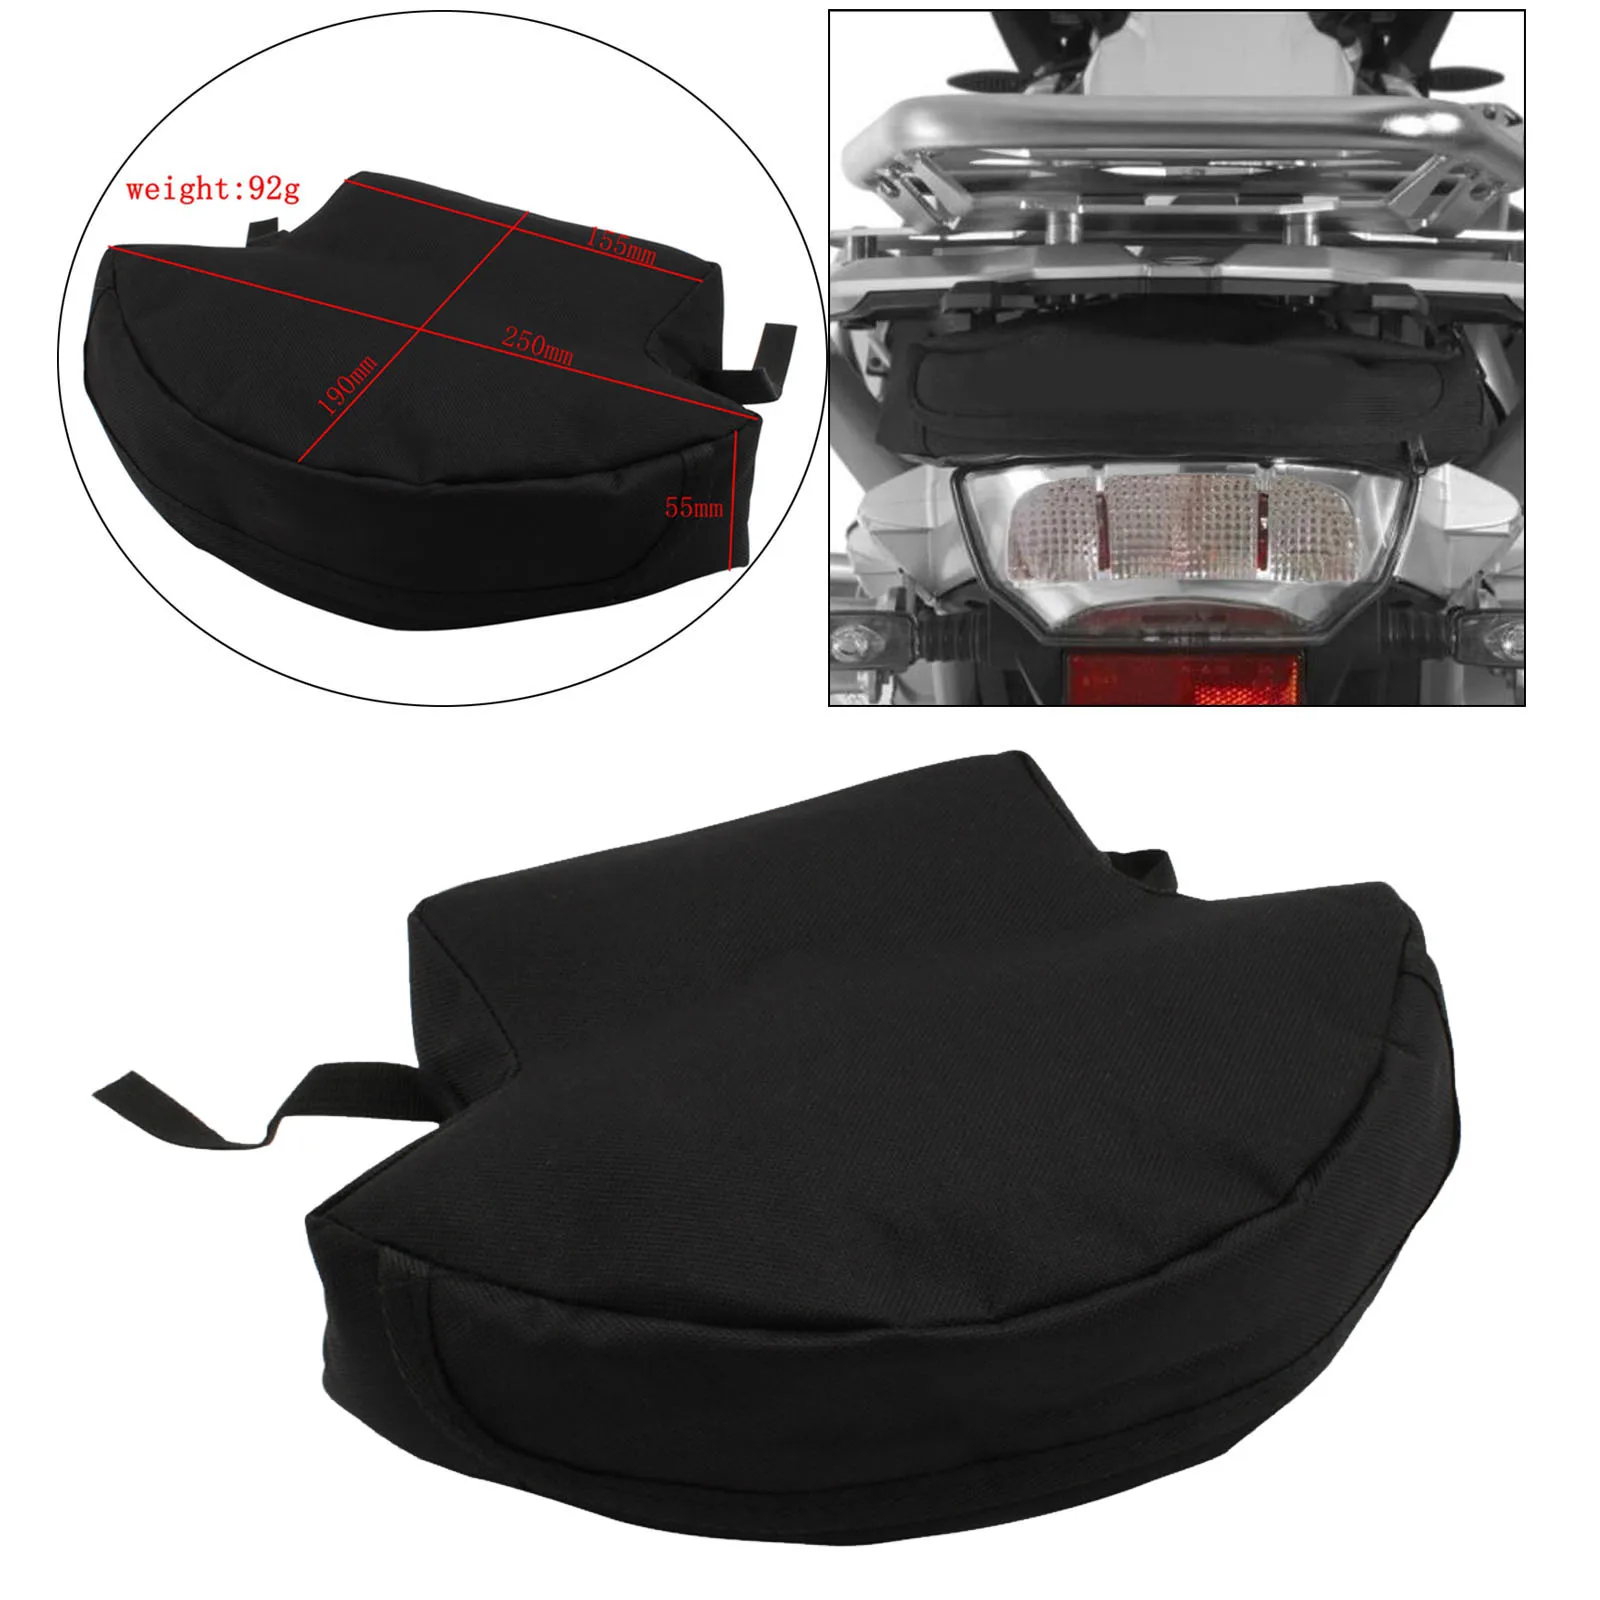 Gap Tool Storage Bag Luggage Rack Rear Luggage Holder Waterproof Seat Tail Bag for  R1250GS R1200GS